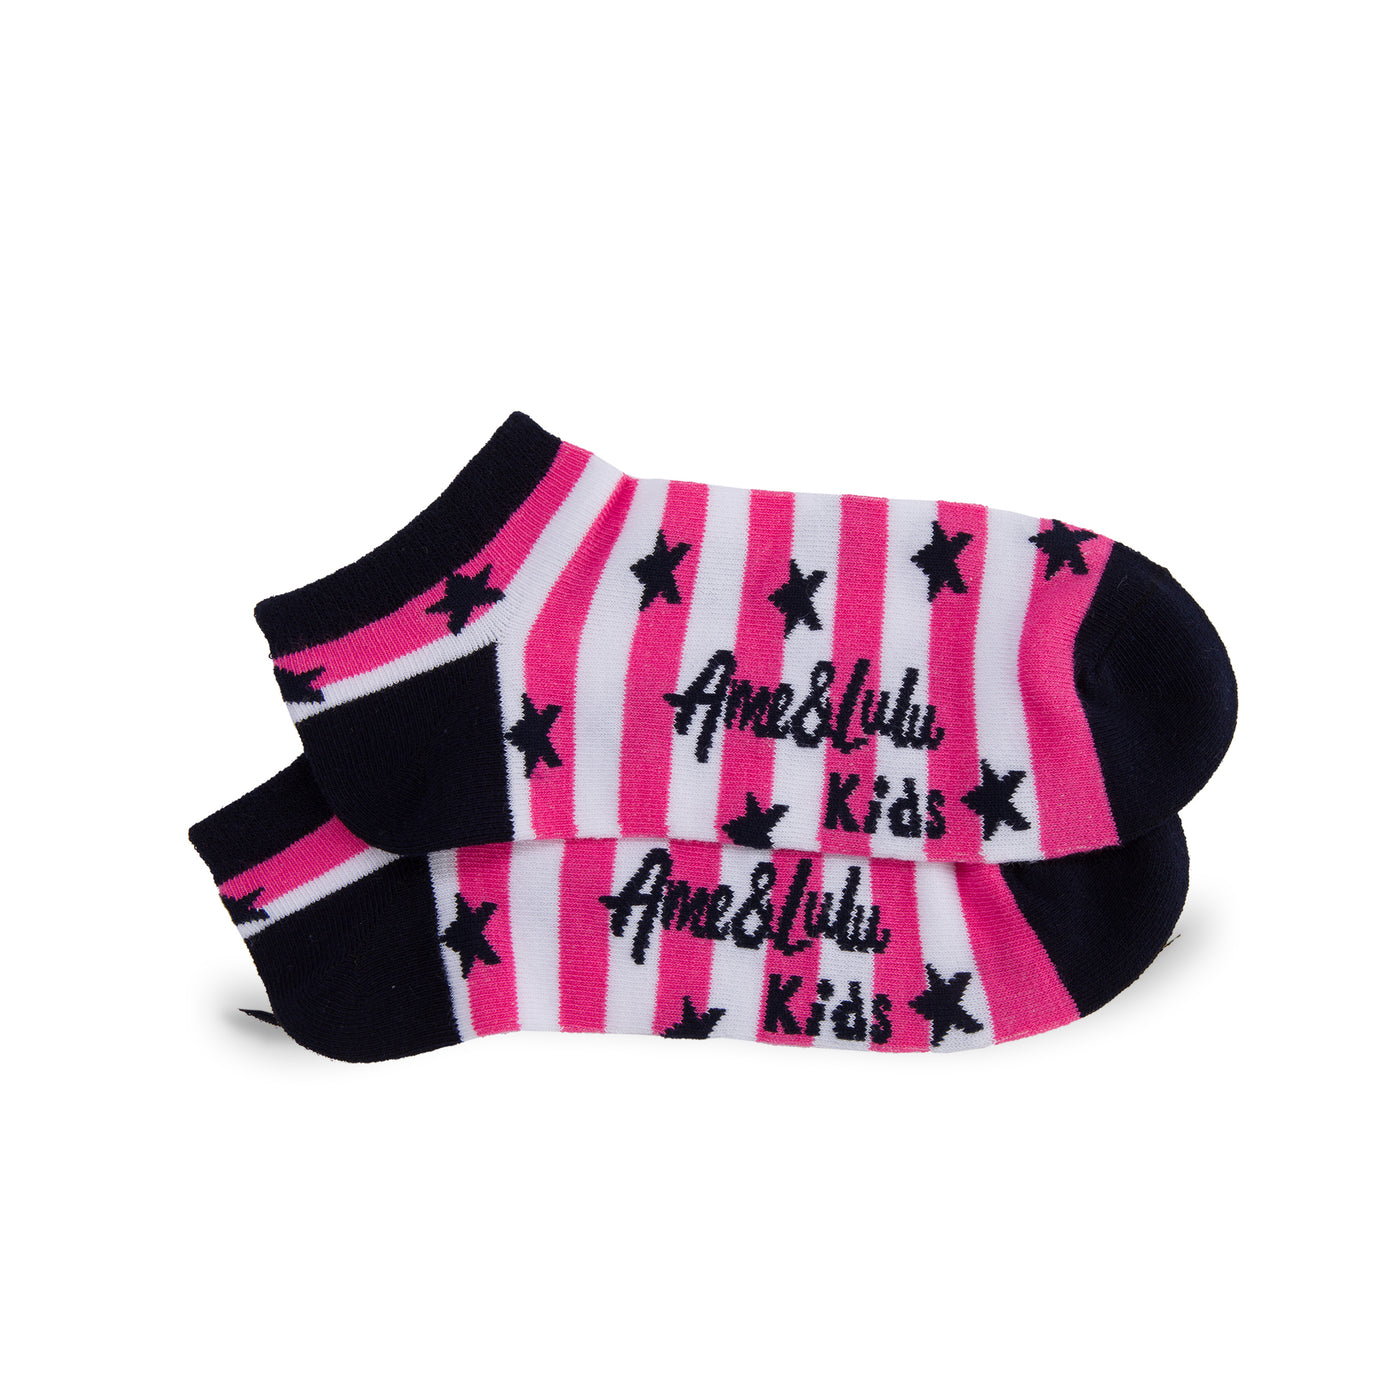 pair of pink and white striped kids socks with navy heel and toes, and navy stars stitched onto socks